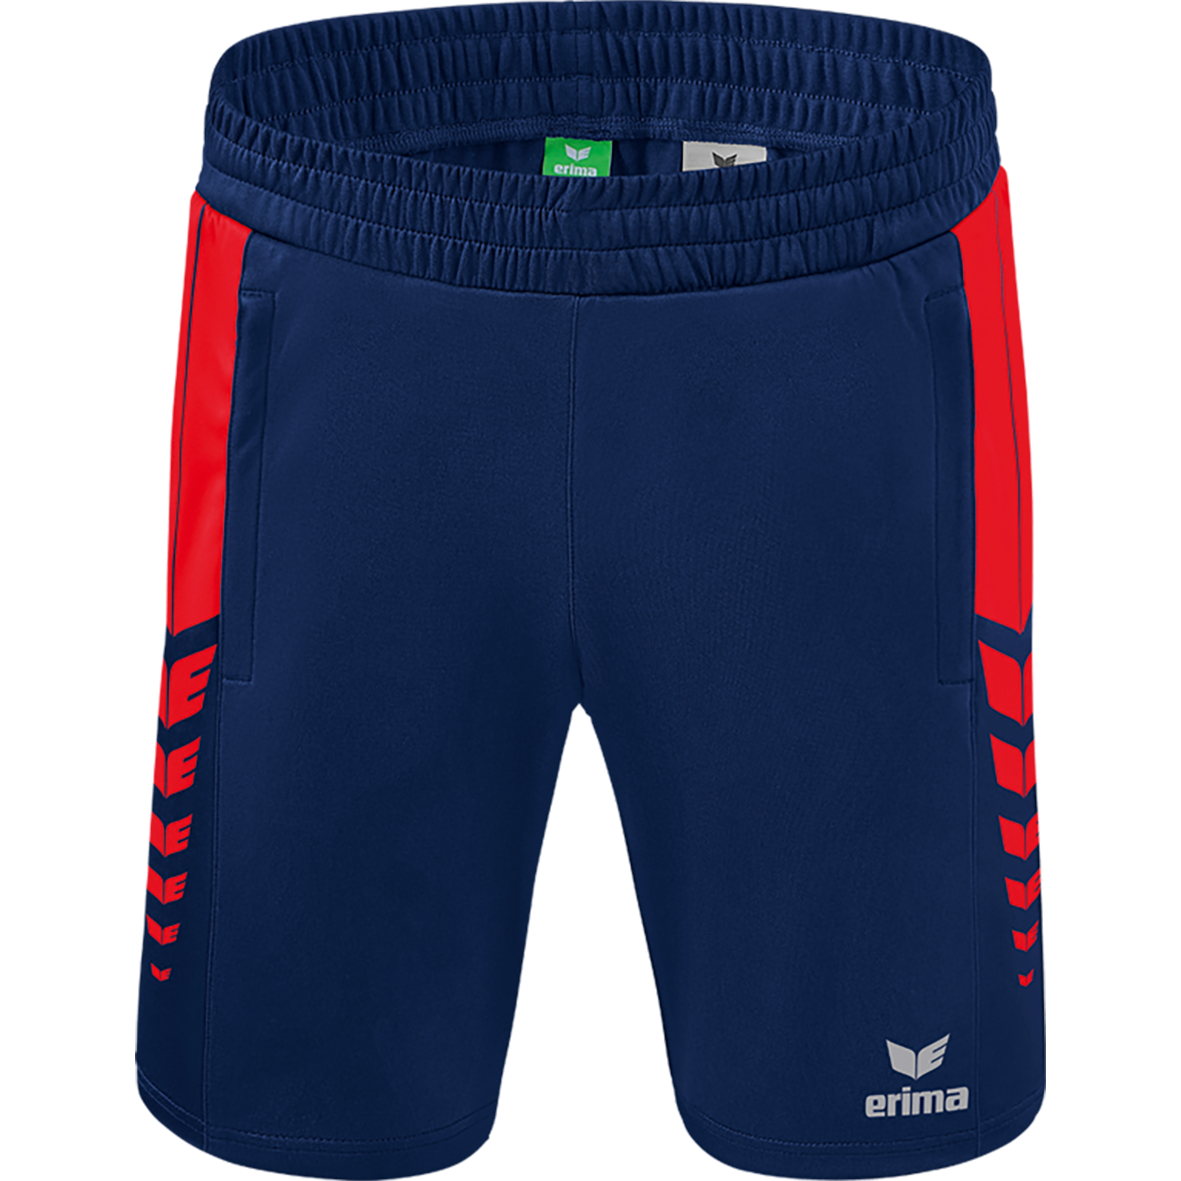 ERIMA SIX WINGS WORKER SHORTS, NEW NAVY-RED MEN.